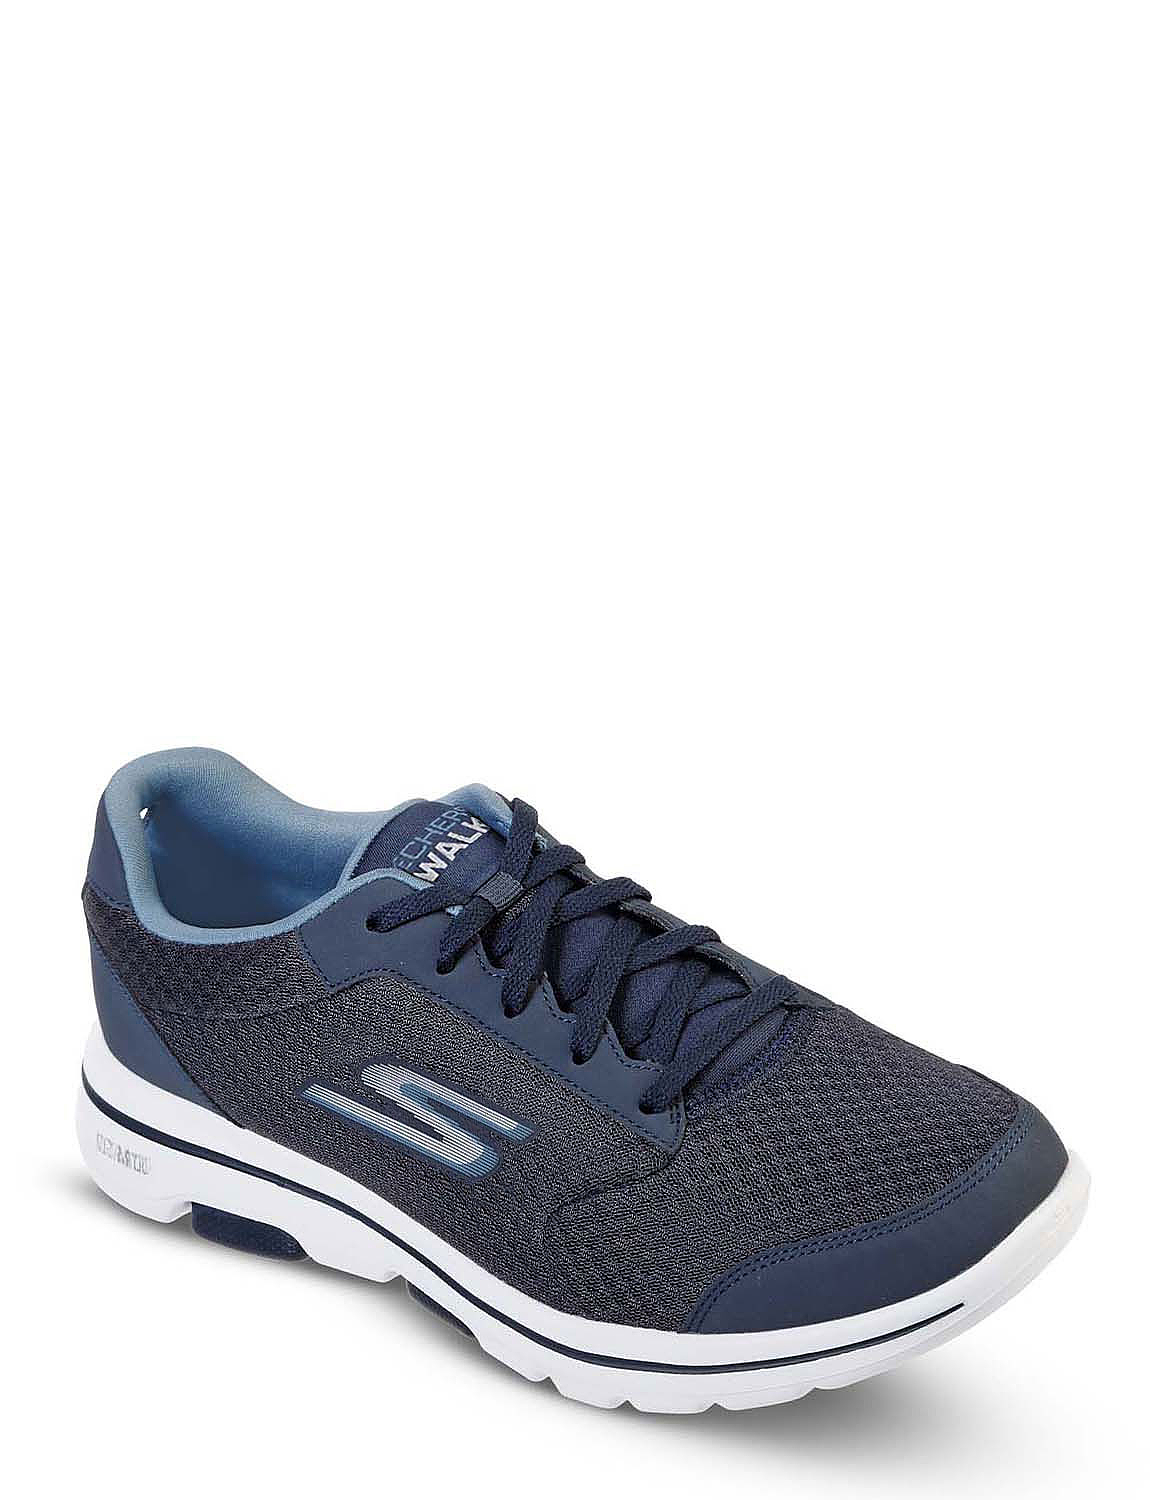 Daddy moral Stort univers Skechers GOwalk 5 Qualify Extra Wide Fit Lace Up Trainer | Chums